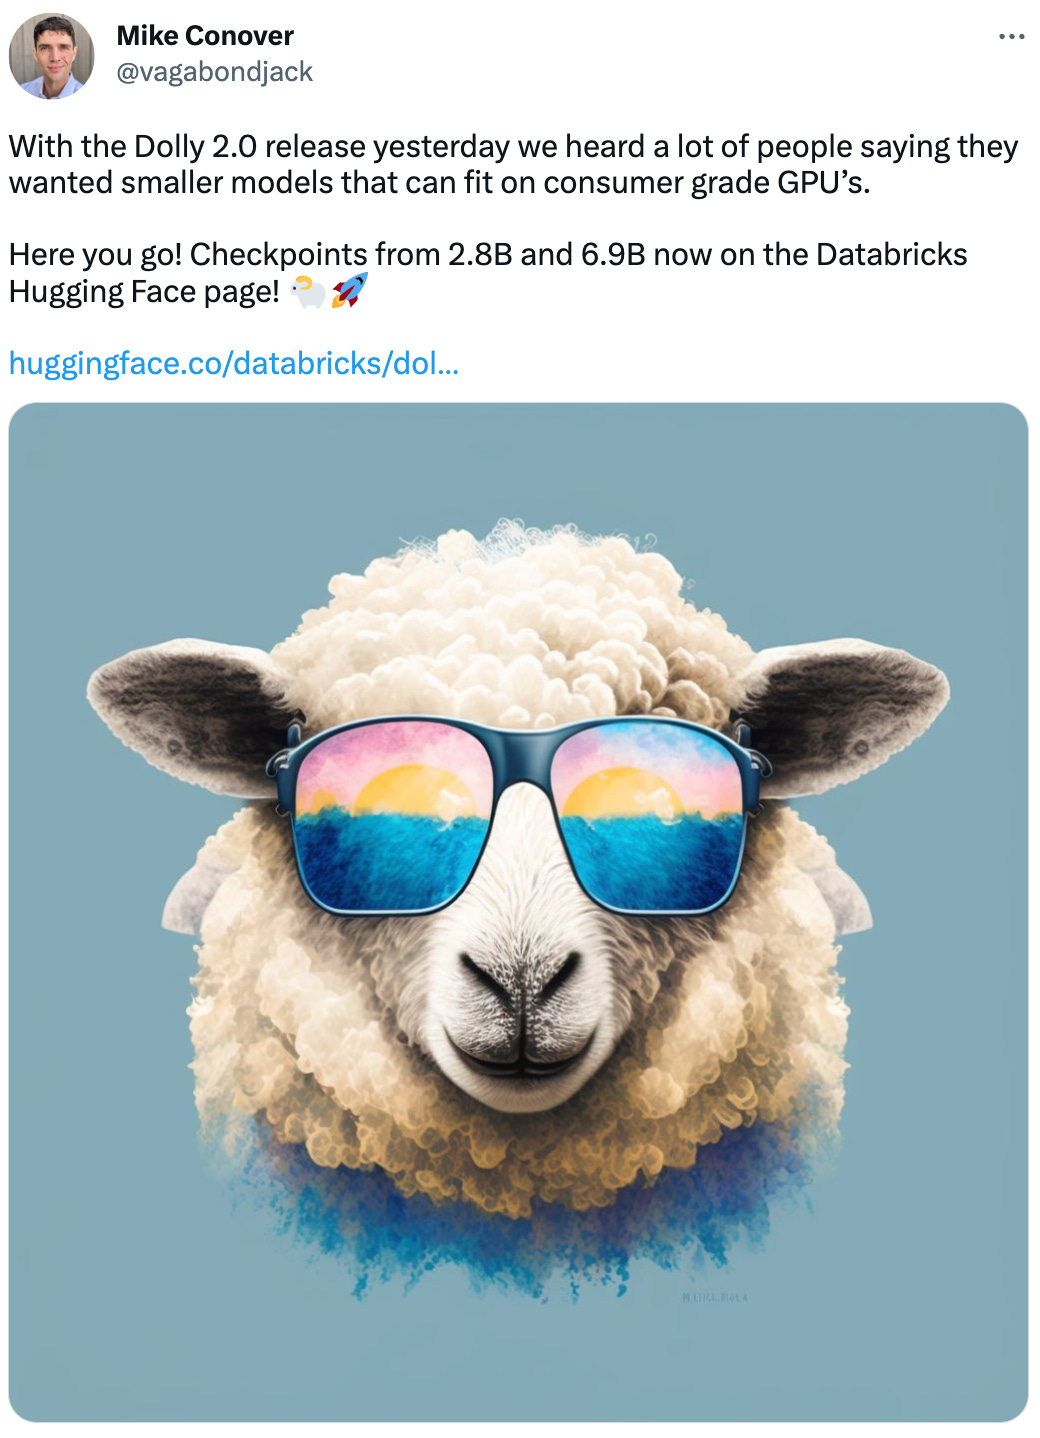 With the Dolly 2.0 release yesterday we heard a lot of people saying they wanted smaller models that can fit on consumer grade GPU’s.   Here you go! Checkpoints from 2.8B and 6.9B now on the Databricks Hugging Face page! 🐑🚀  https://huggingface.co/databricks/dolly-v2-2-8b